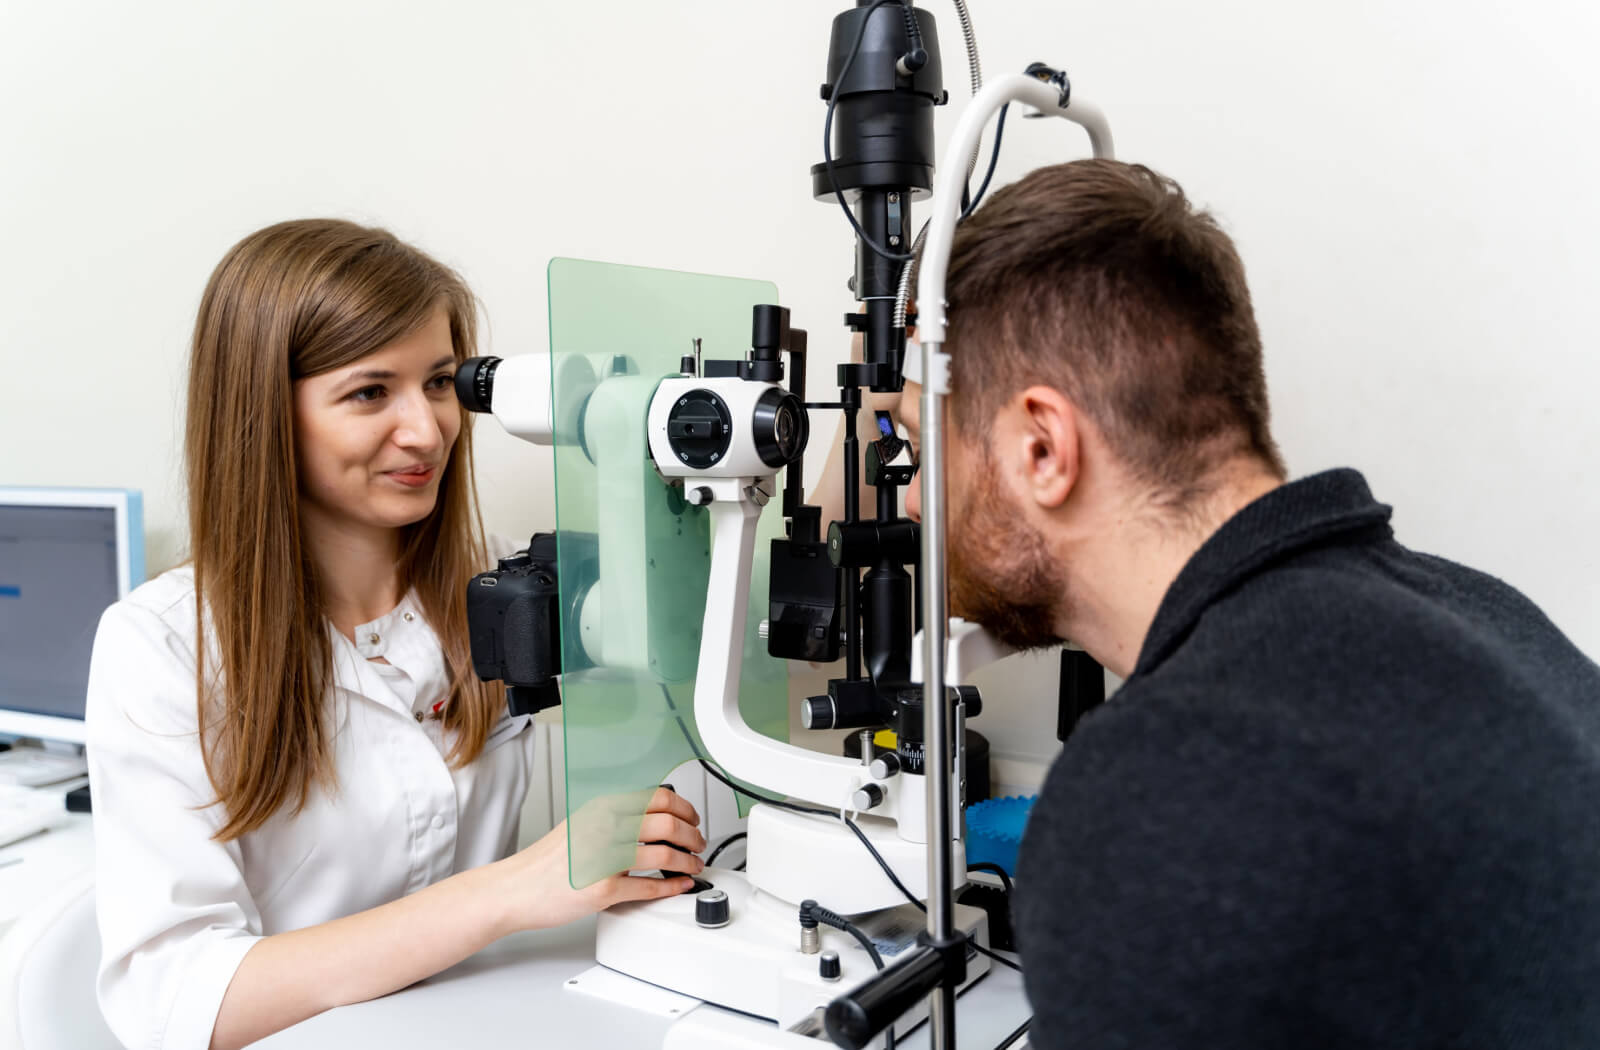 A female optometrist examining the eyes of a young man using a medical device to detect potential eye problems.
